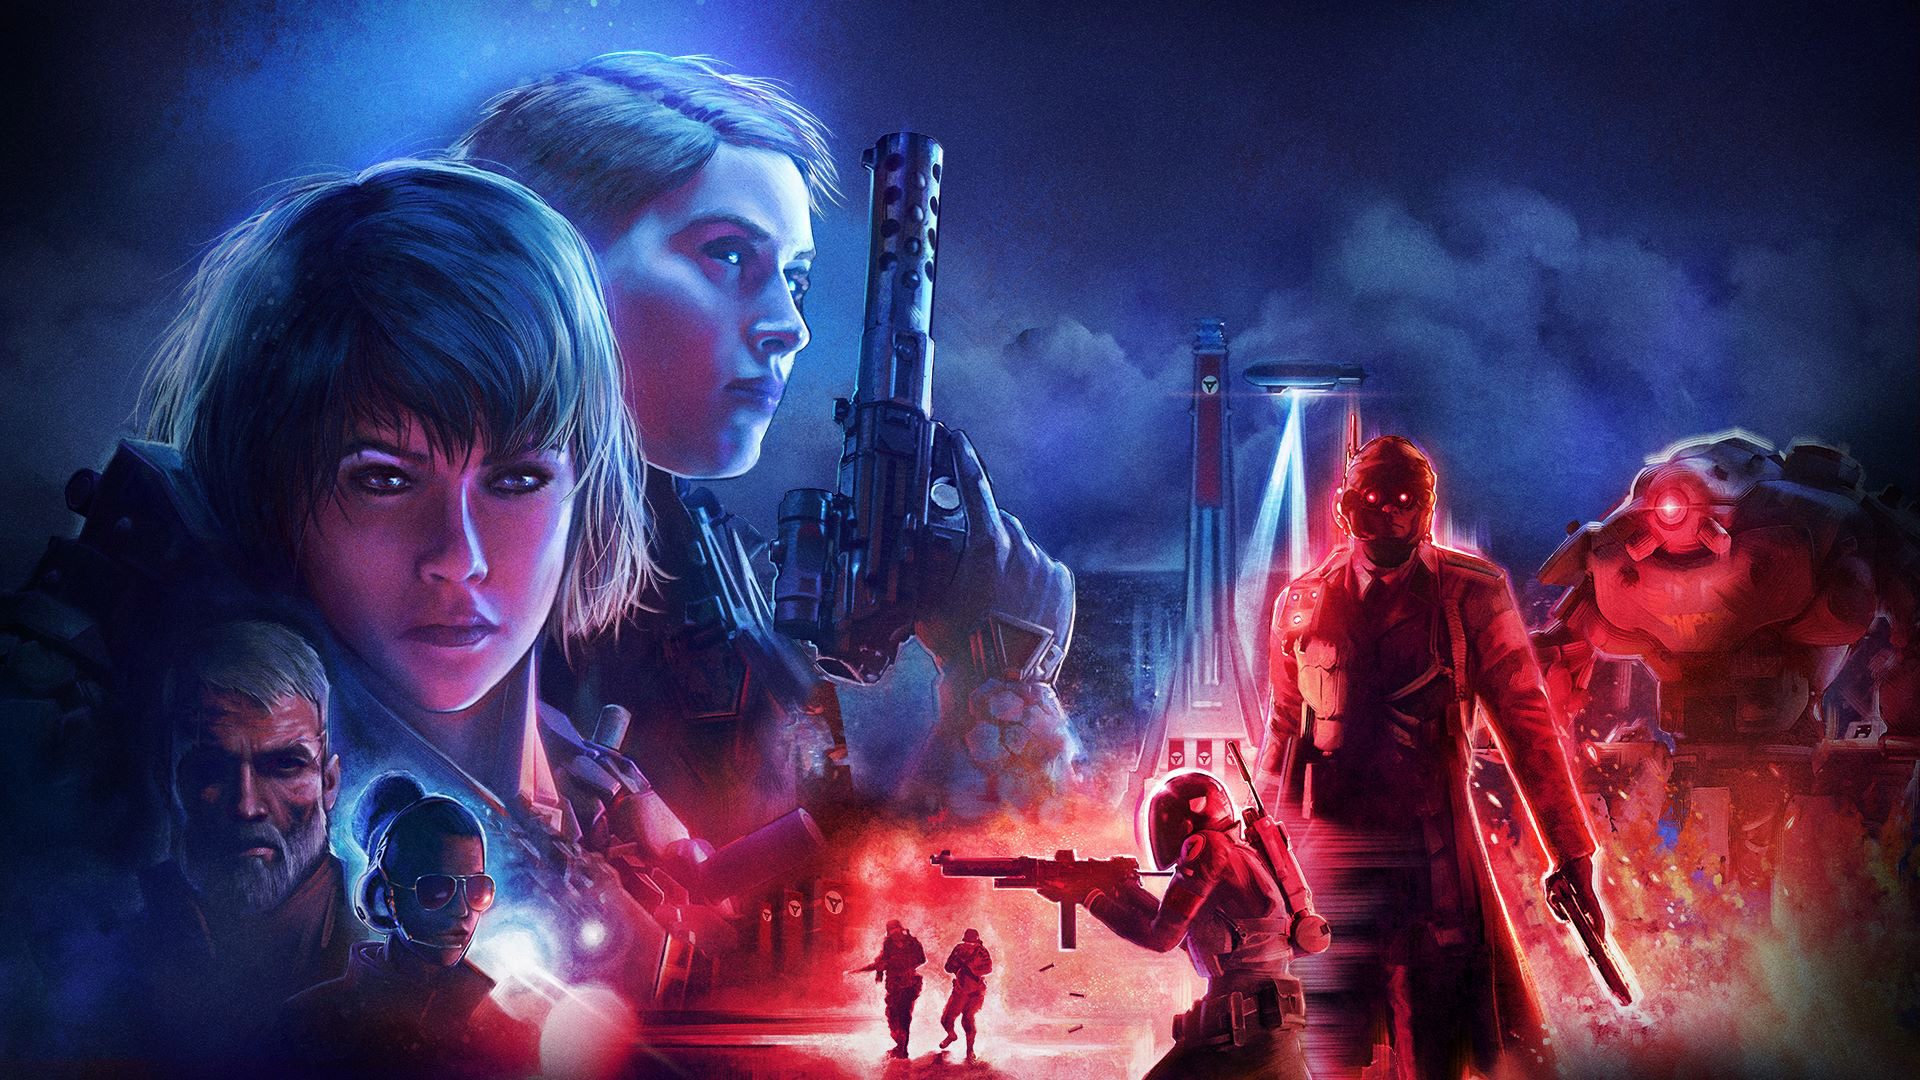 E3 2019: Co-op shooter Wolfenstein: Youngblood announced